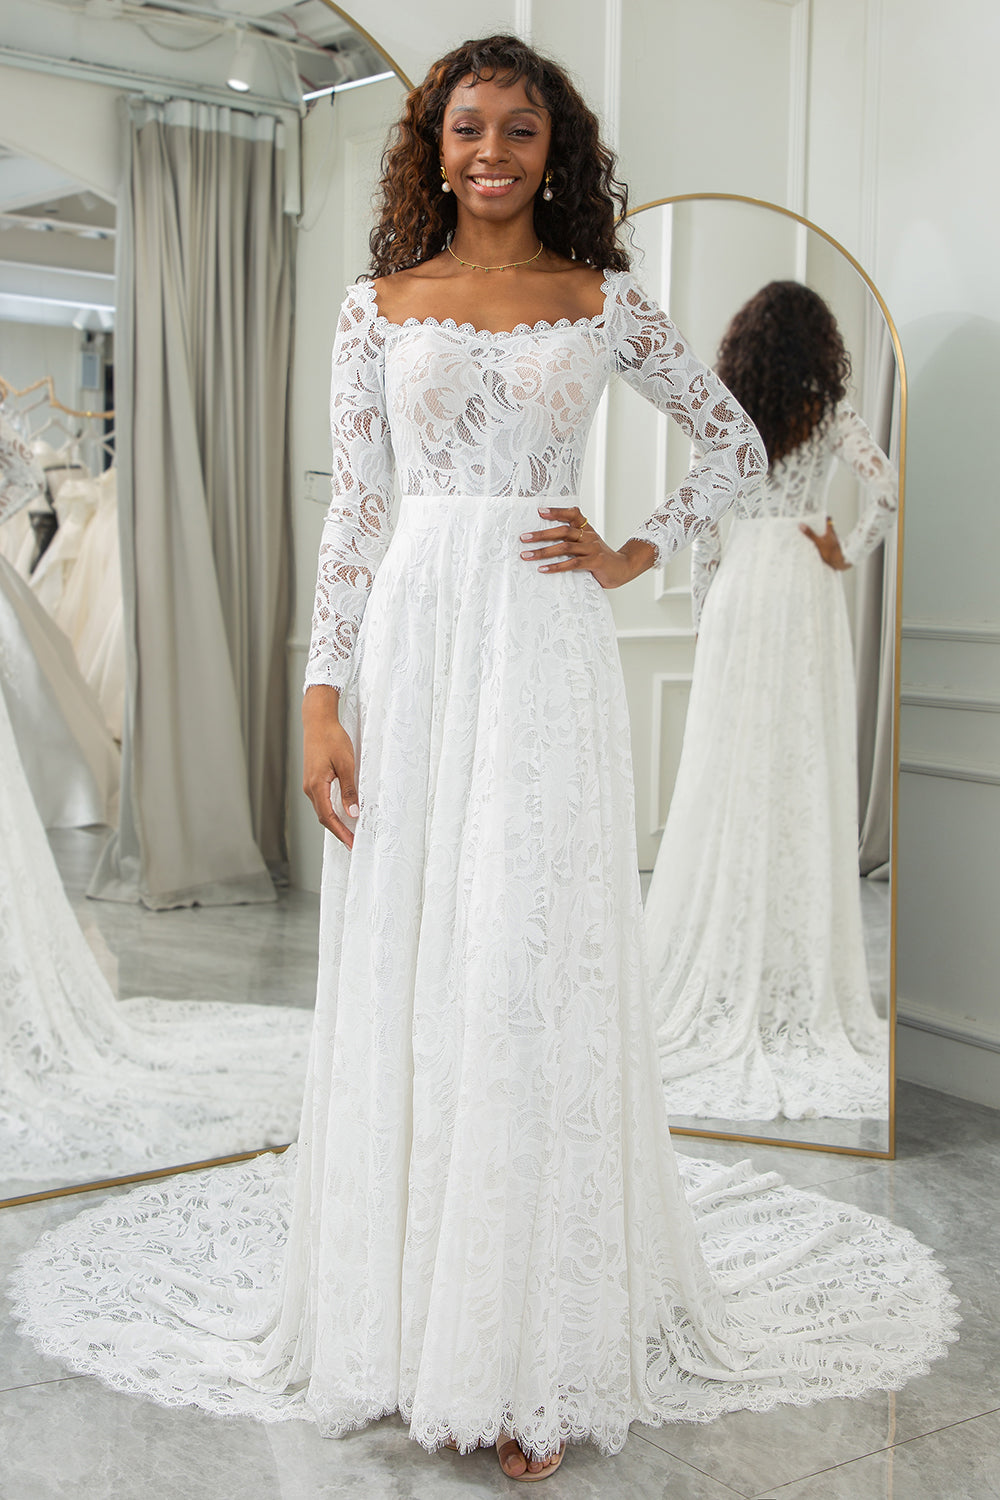 Square-neck wedding dress with long sleeves